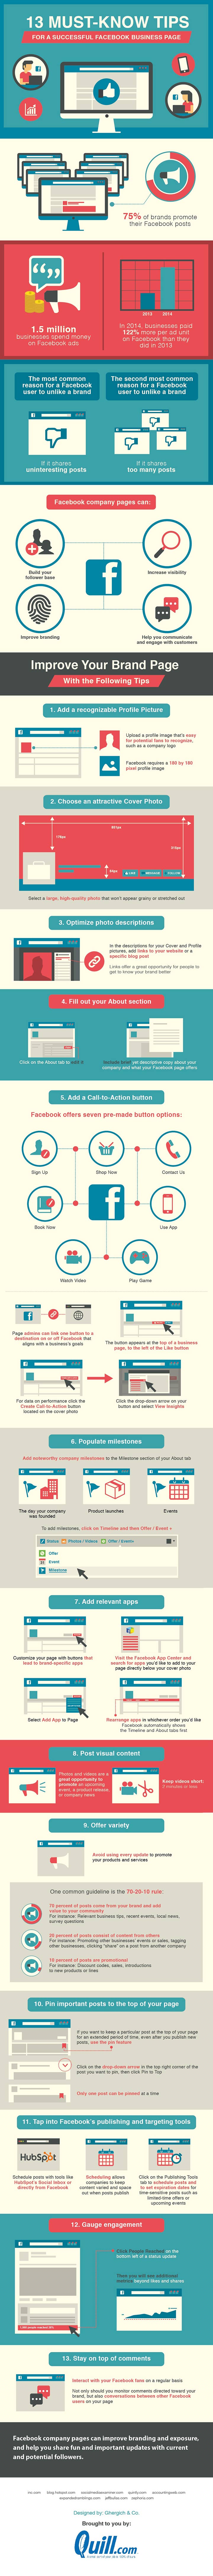 facebook-business-page-tips-infographic